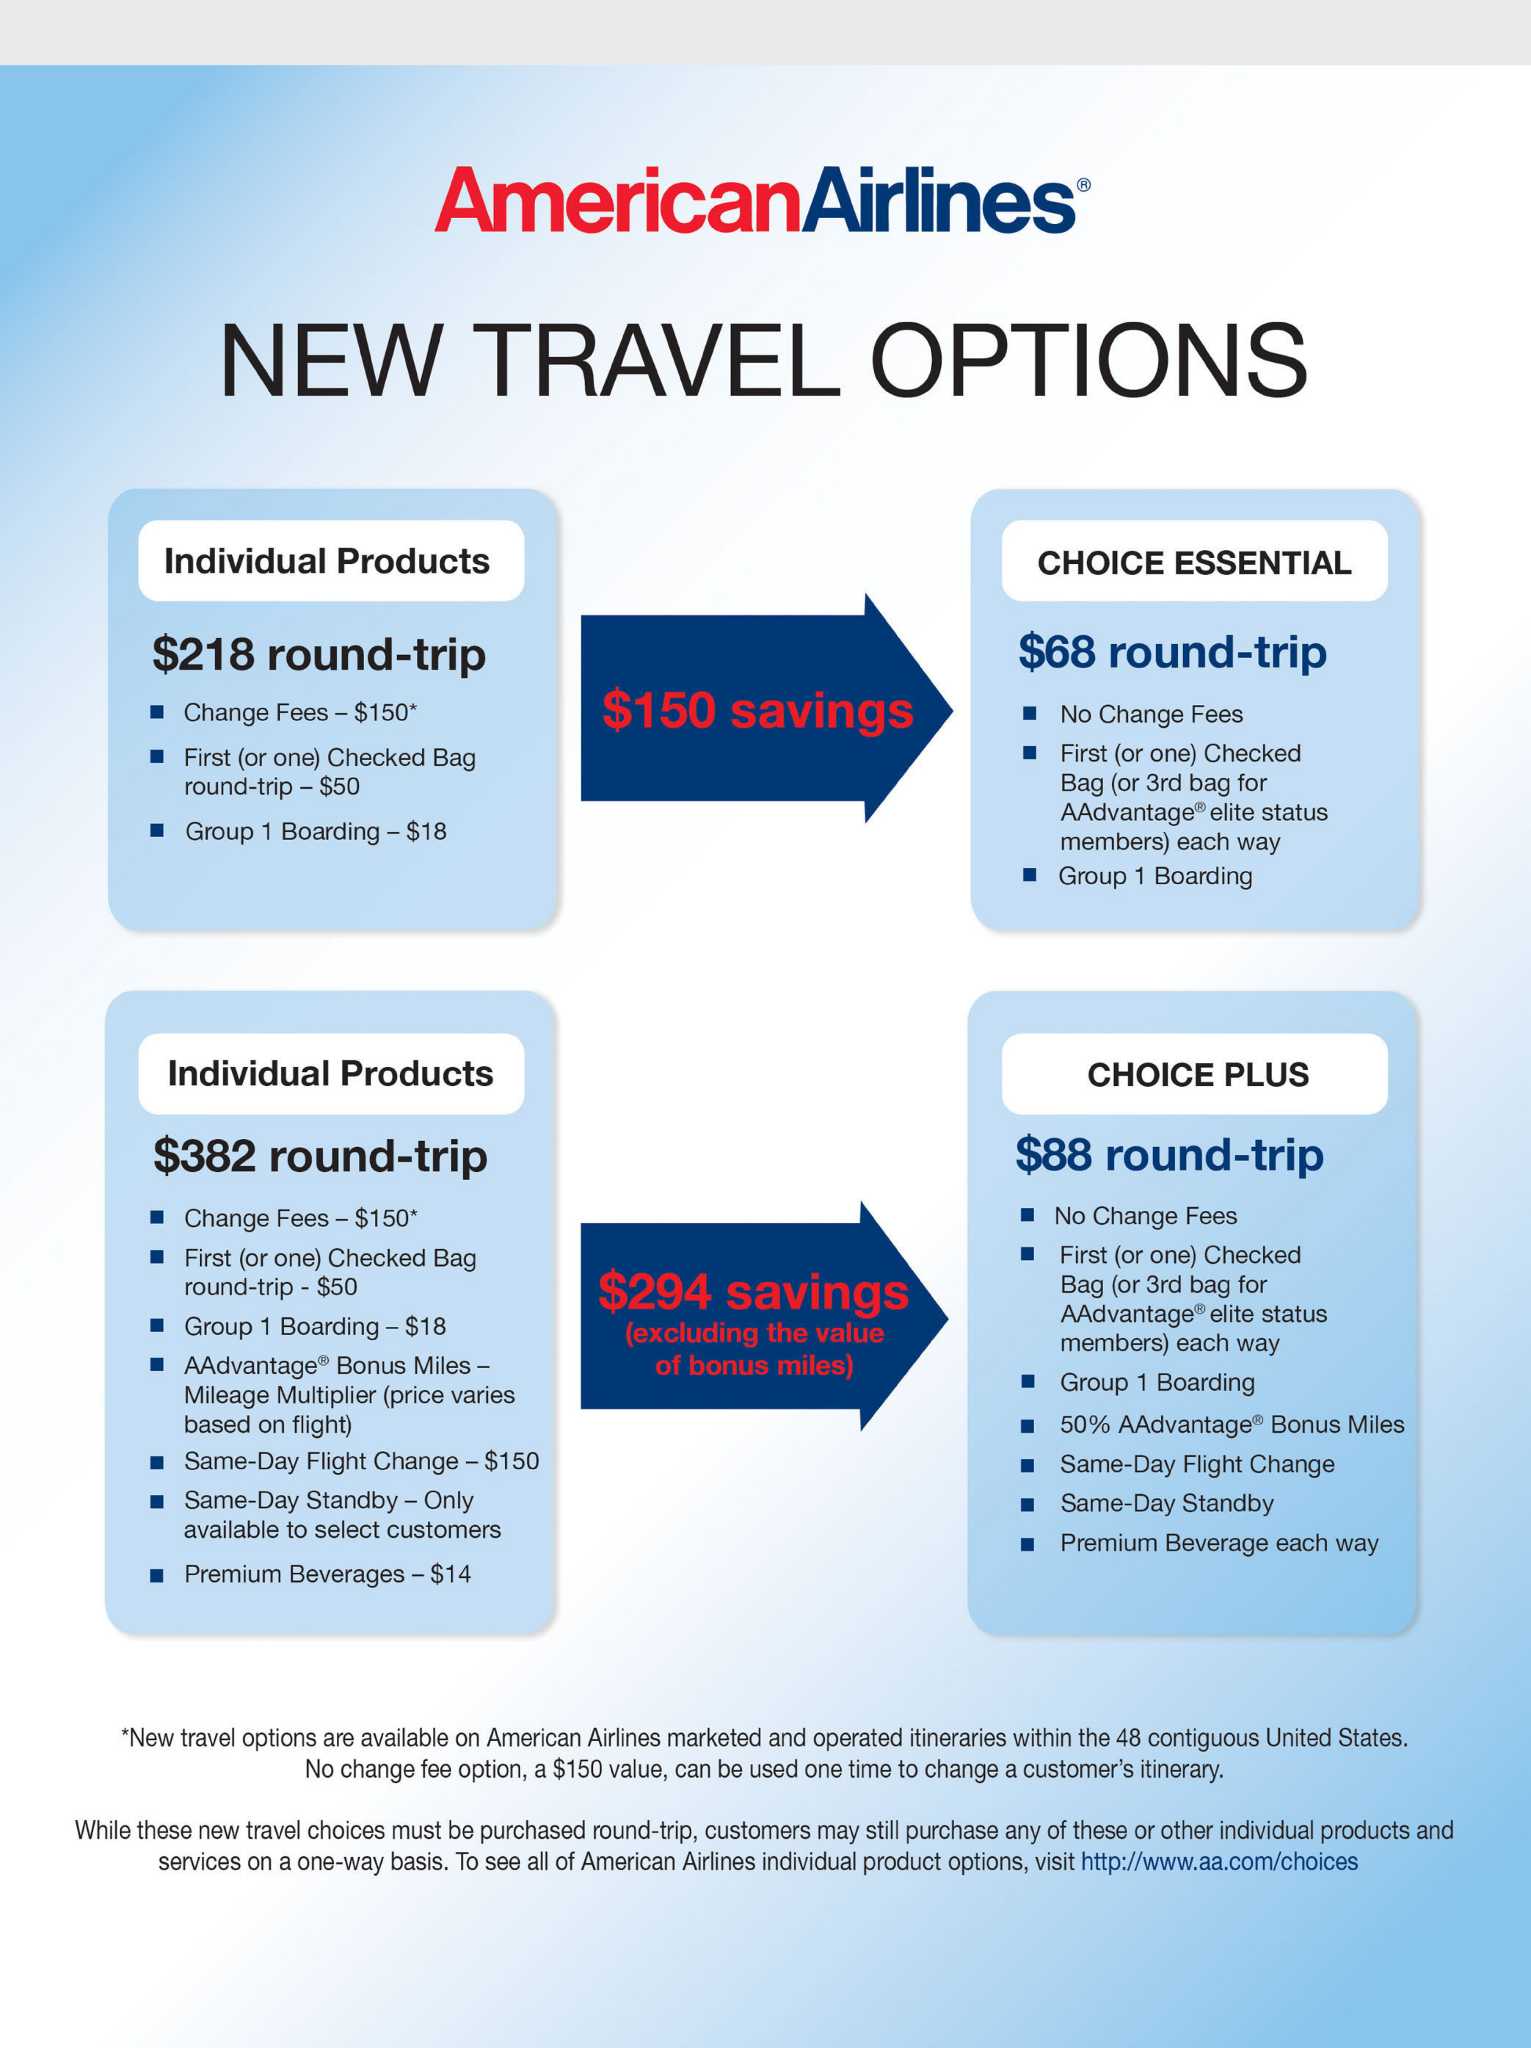 American Airlines rolls out new fare structure